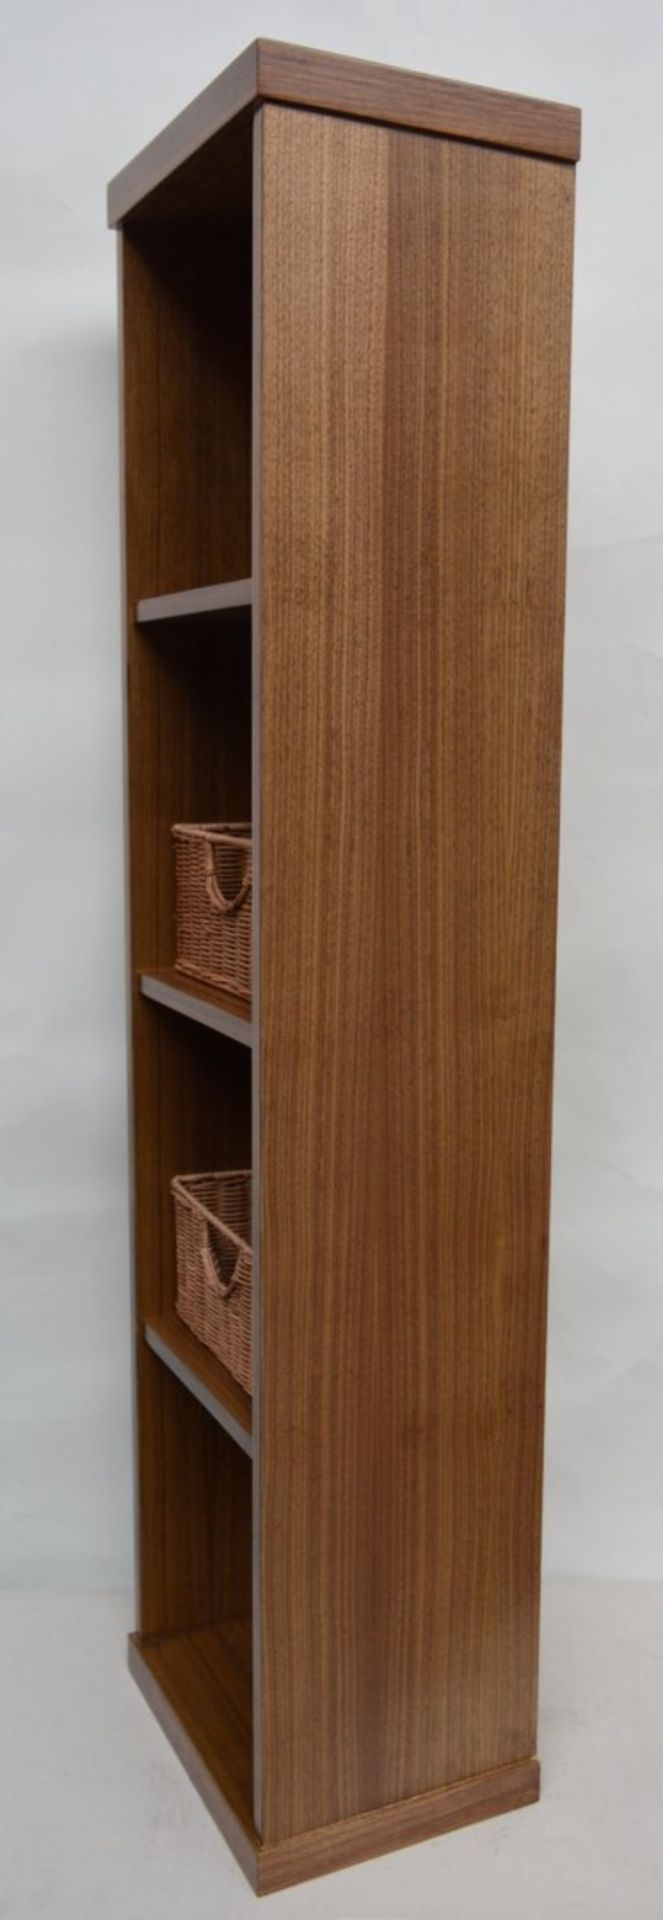 1 x Vogue ARC Series 2 Bathroom Storage Shelving Unit - Wall Mounted or Floor Standing - WALNUT - Image 3 of 9